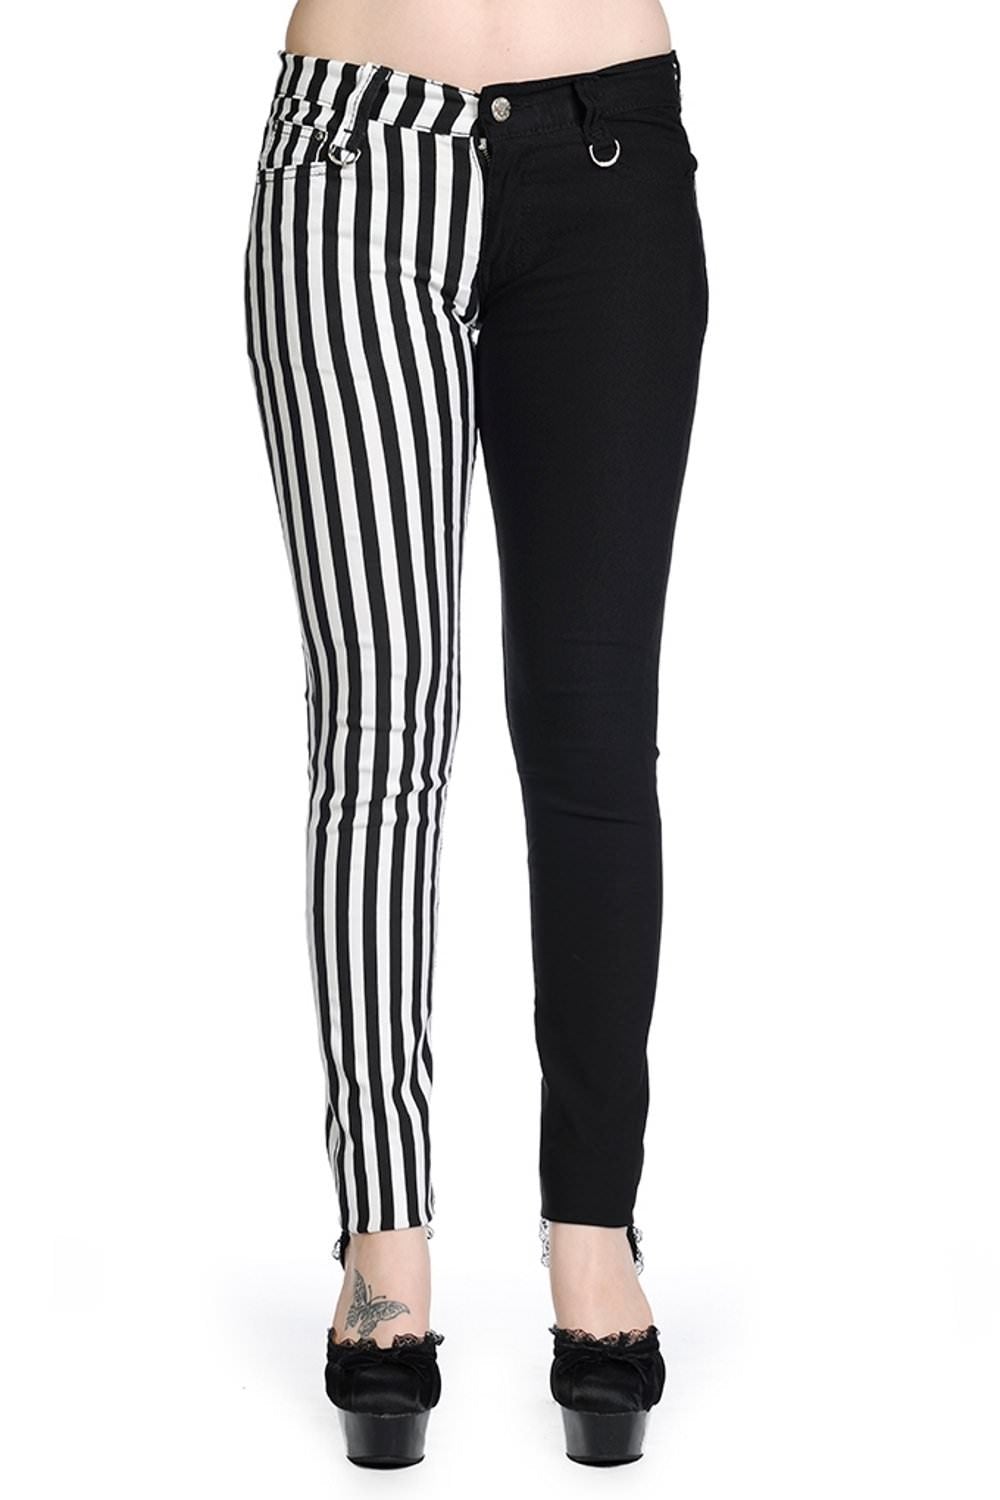 Half striped and half black low rise trousers. 